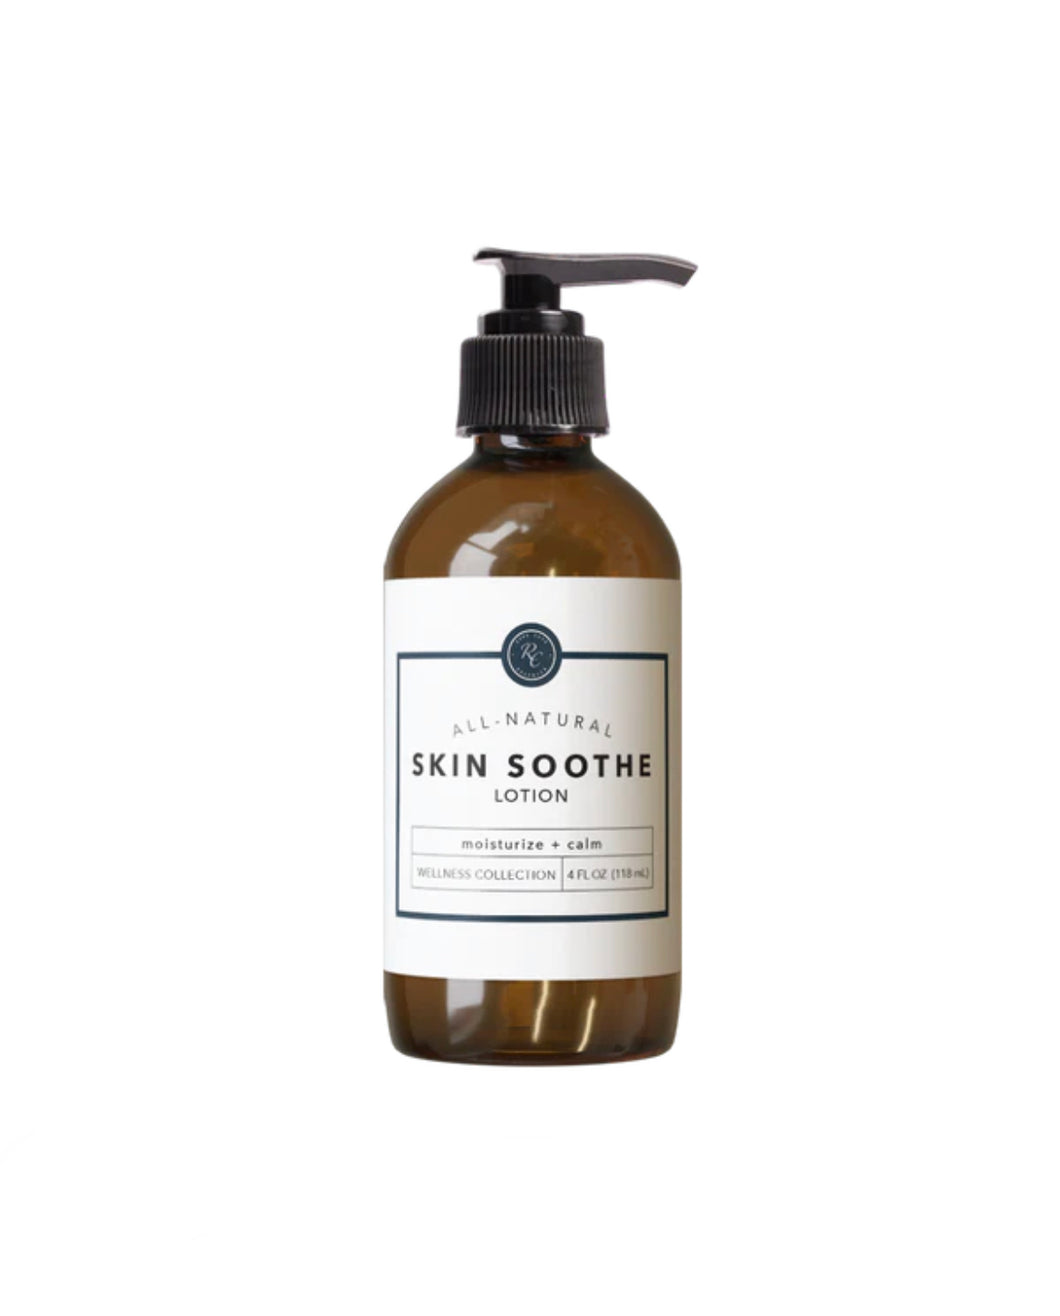 SKIN SOOTHE LOTION | 4 OZ